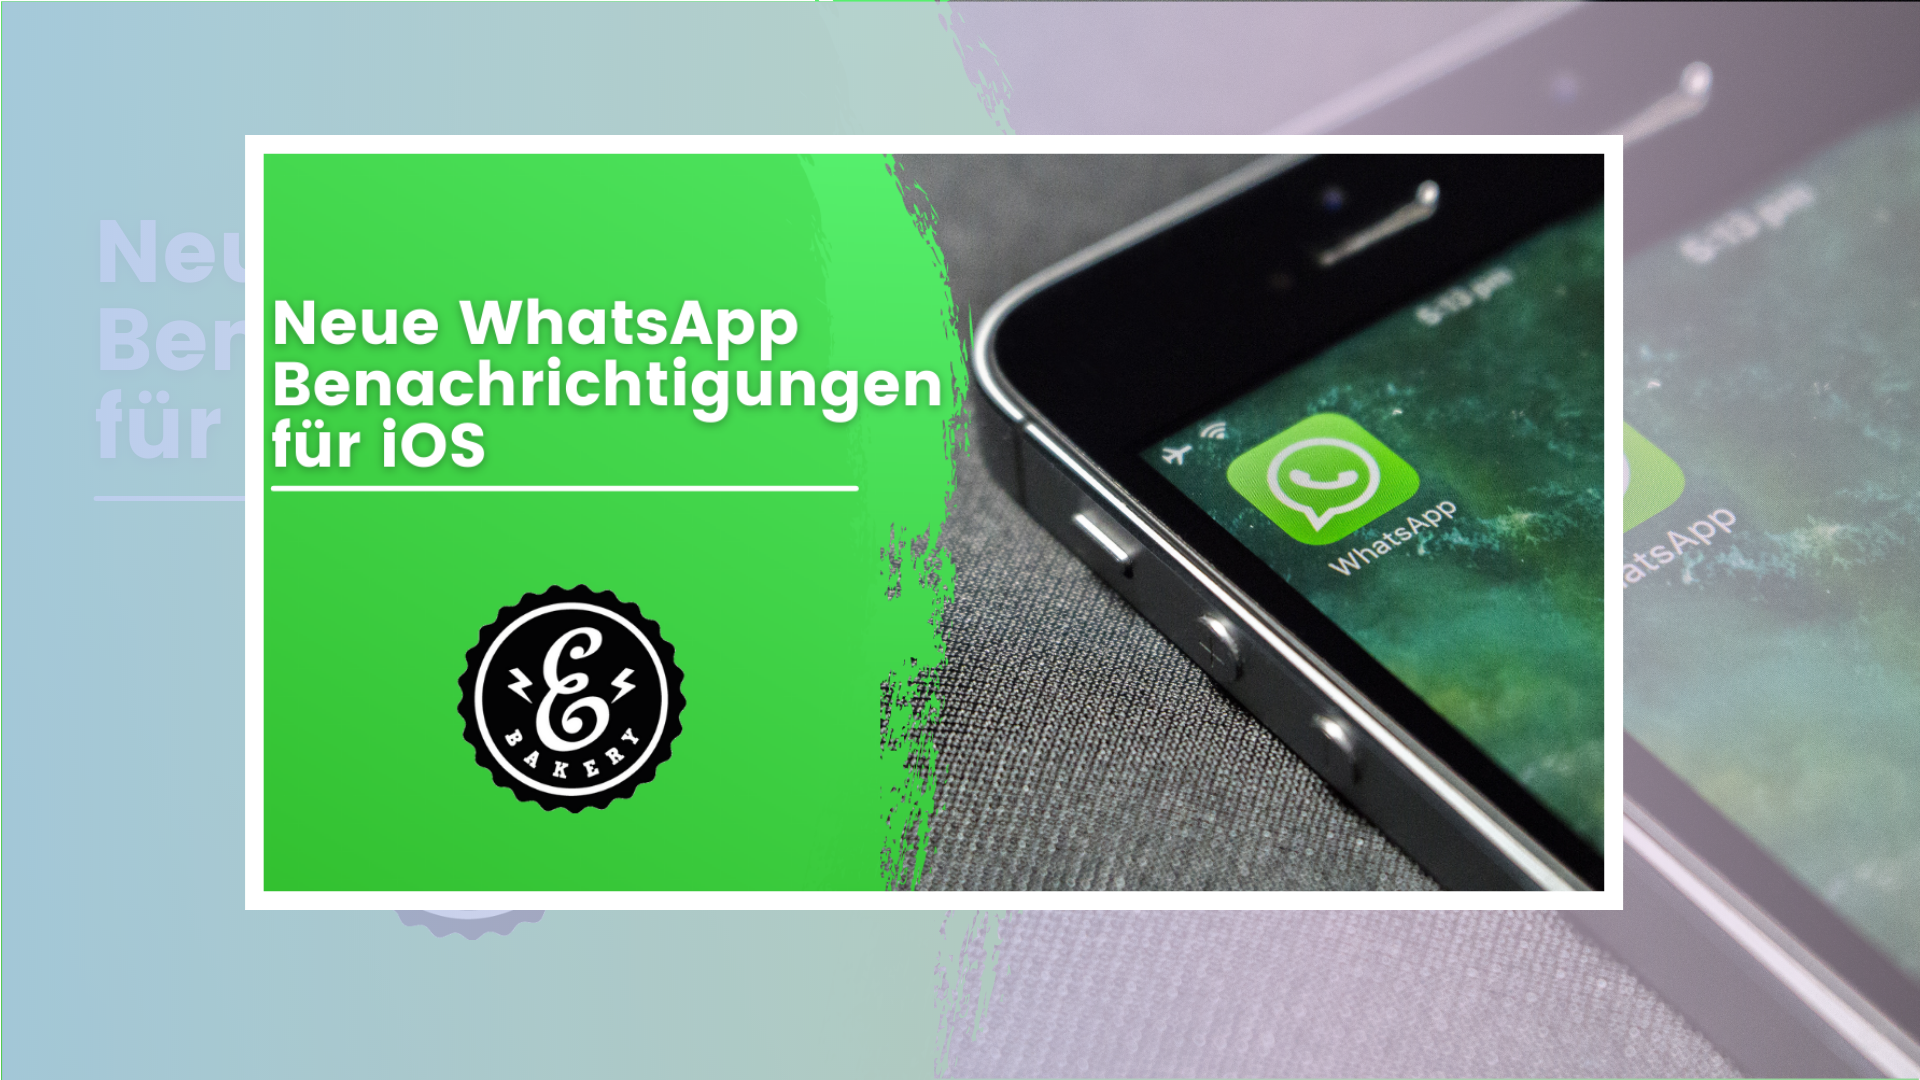 New WhatsApp notifications for iOS – profile picture for Iphone